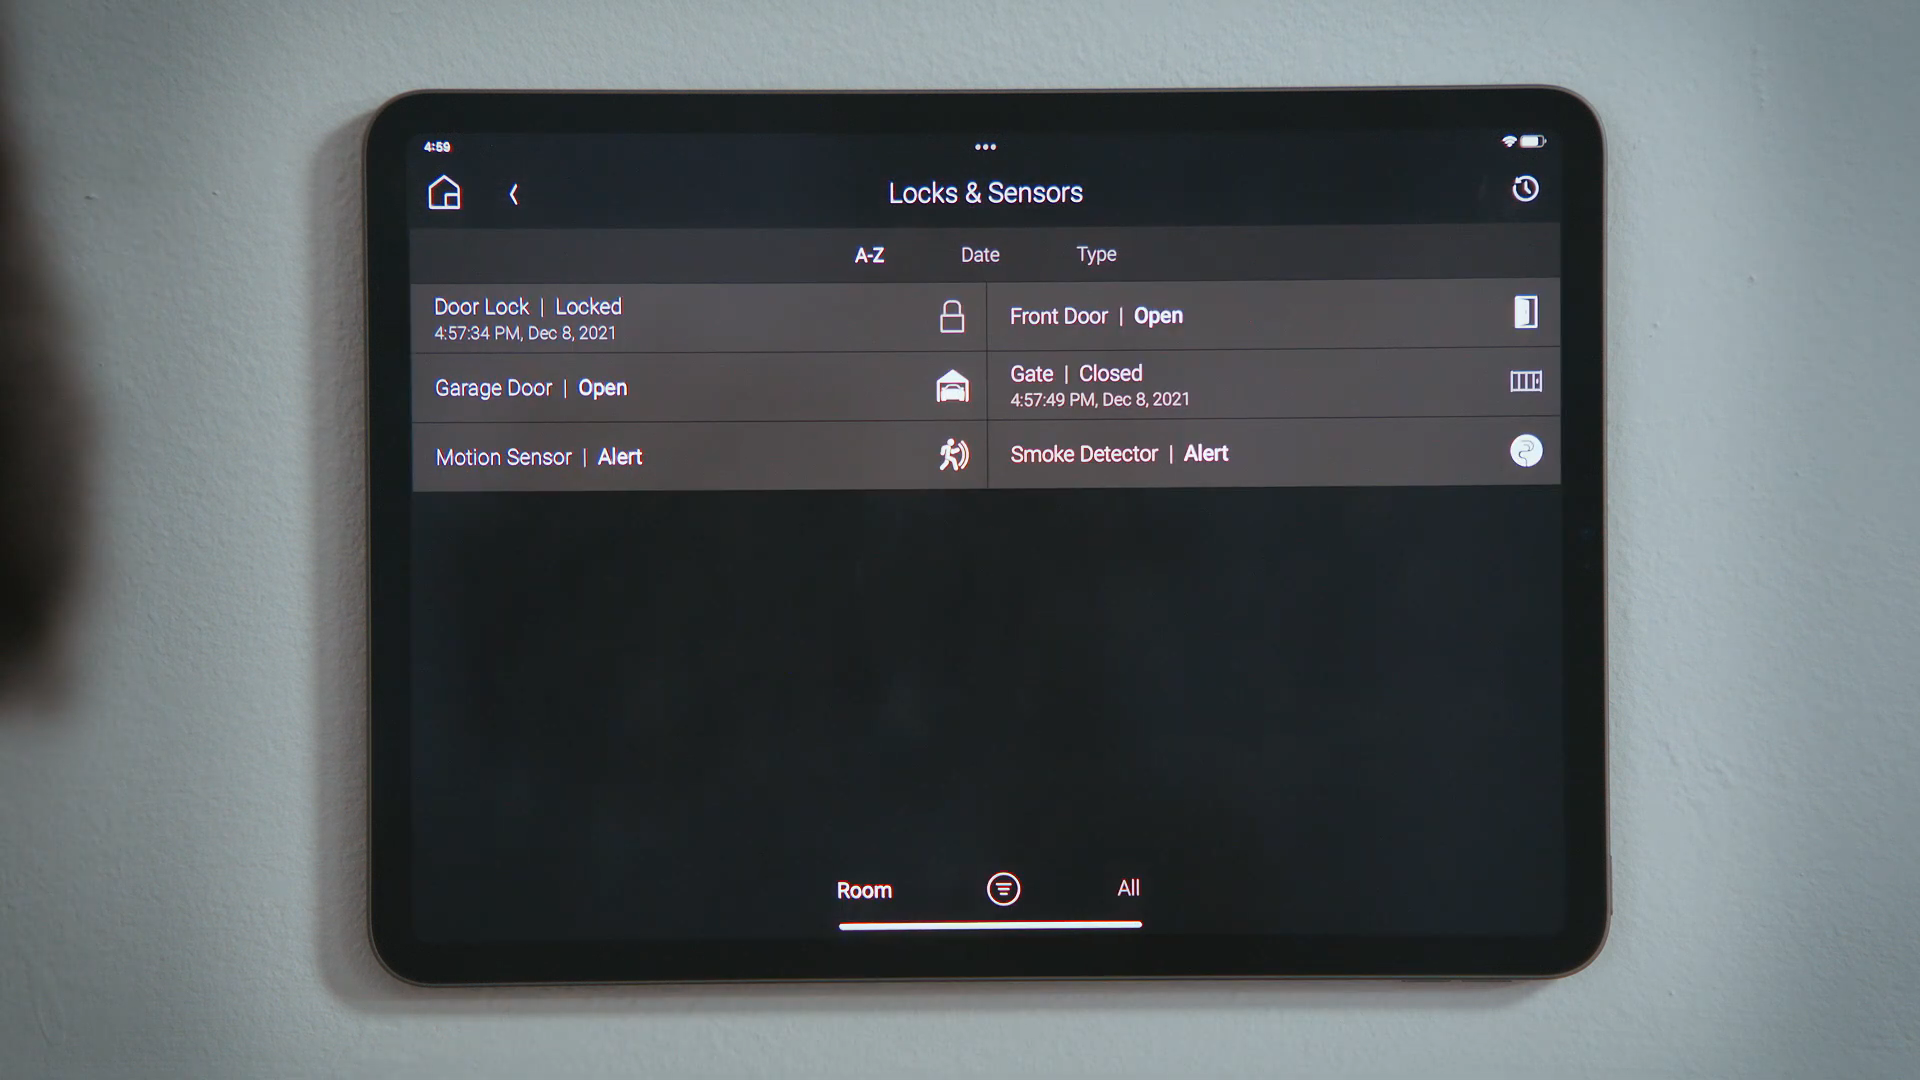 Load video: How do I… check my locks and sensors?  Did you remember to close the garage door? Is your door locked? Where are the kids playing now? Your Control4 system can tell you all that and more at a glance!  Tap security and then tap locks &amp; sensors to all of the locks, doors and sensors integrated into your Control4 system by your installer.   You may see motion sensors, smoke and carbon monoxide detectors, water leak sensors, and door sensors indicating if there is motion, smoke, a leak or an open door. These sensors cannot be actively controlled, tapping them does not do anything.   Other devices, like door locks, garage doors and gates can be controlled. Tap them to toggle their state: locking the door, closing the garage door and the gate.   In the navigation bar you can sort these devices alphabetically, by date which sorts by when they last changed state, or by type of device.   The filter bar can display only the devices in this room, or all devices in the whole house. The filter icon will filter the list to only show those devices in an active, or unsecure state.   For devices that you would want to view or control the most, tap and hold that device to favorite to room for quicker and easier access. And that’s how you check your locks and sensors!